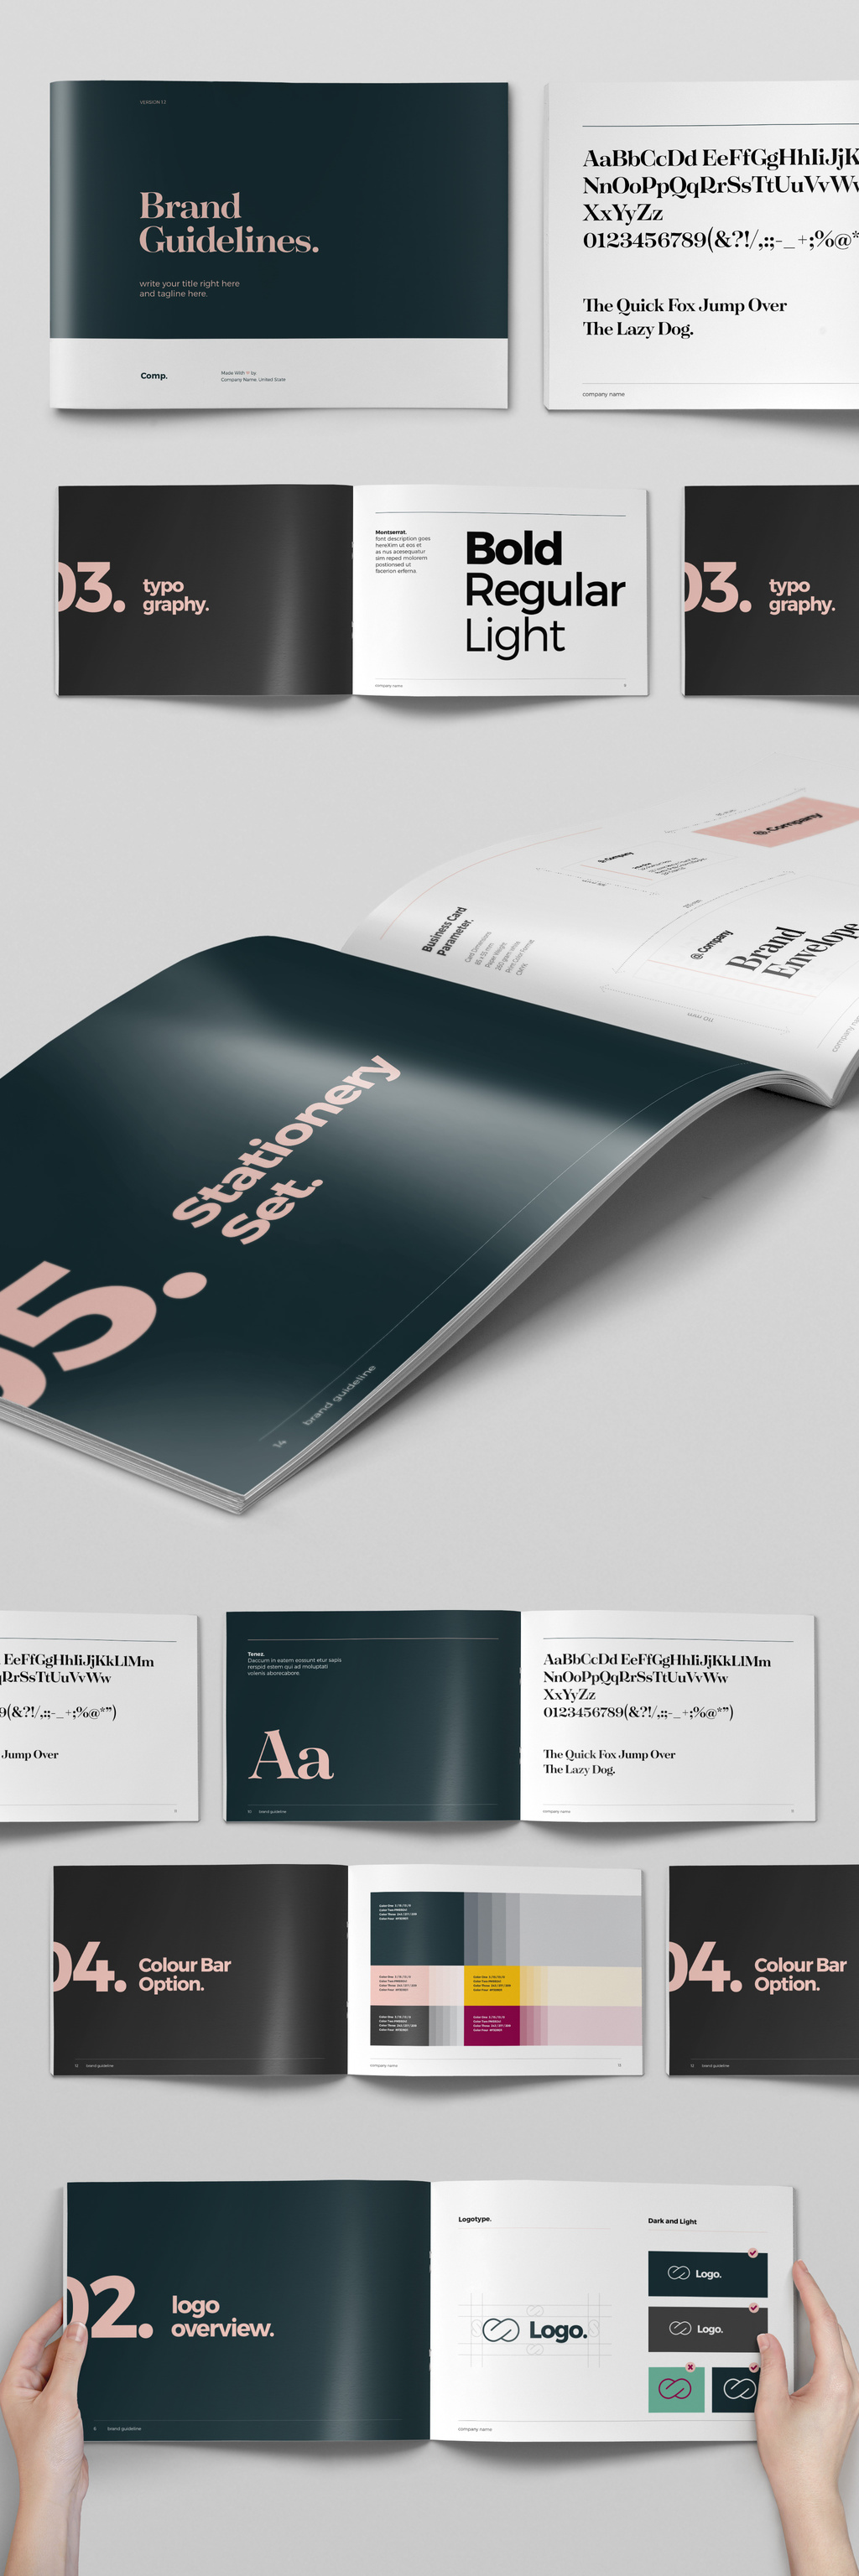 Clean InDesign Brand Guidelines Template